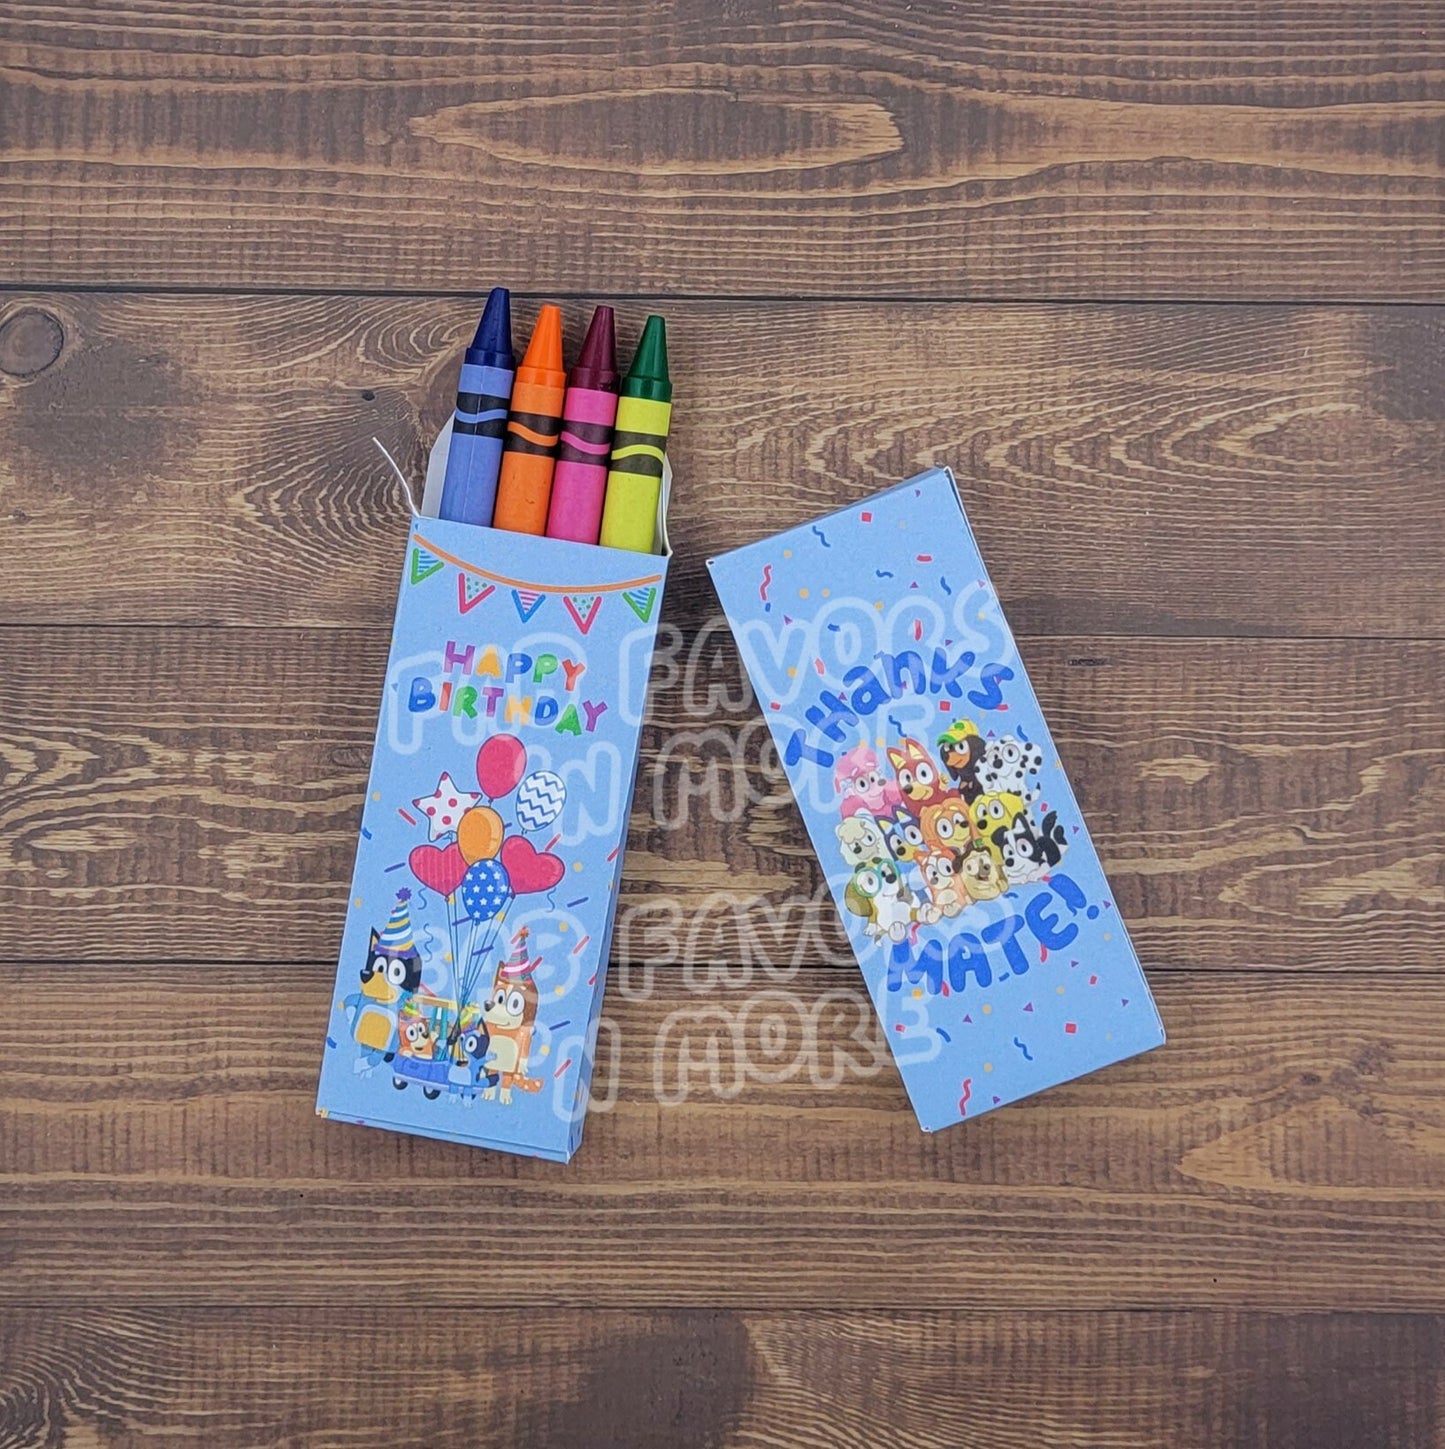 Bluey Party Favors Bluey Activity Pack Party Favor